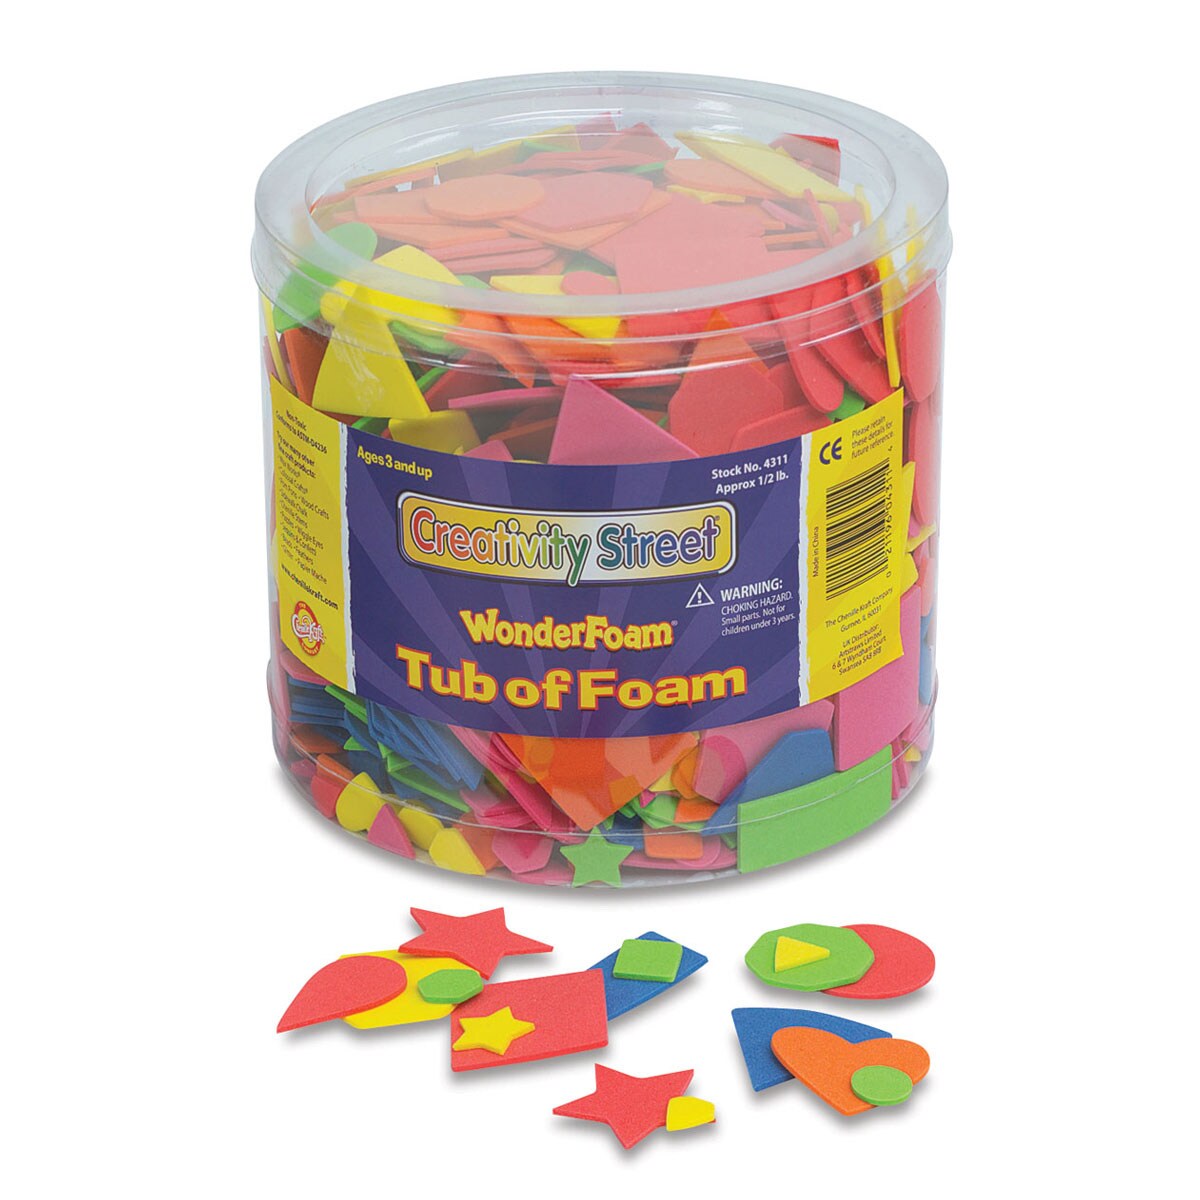 Creativity Street WonderFoam Pieces - Assorted Colors and Shapes, 1/2 lb, Approx 3000 Pieces